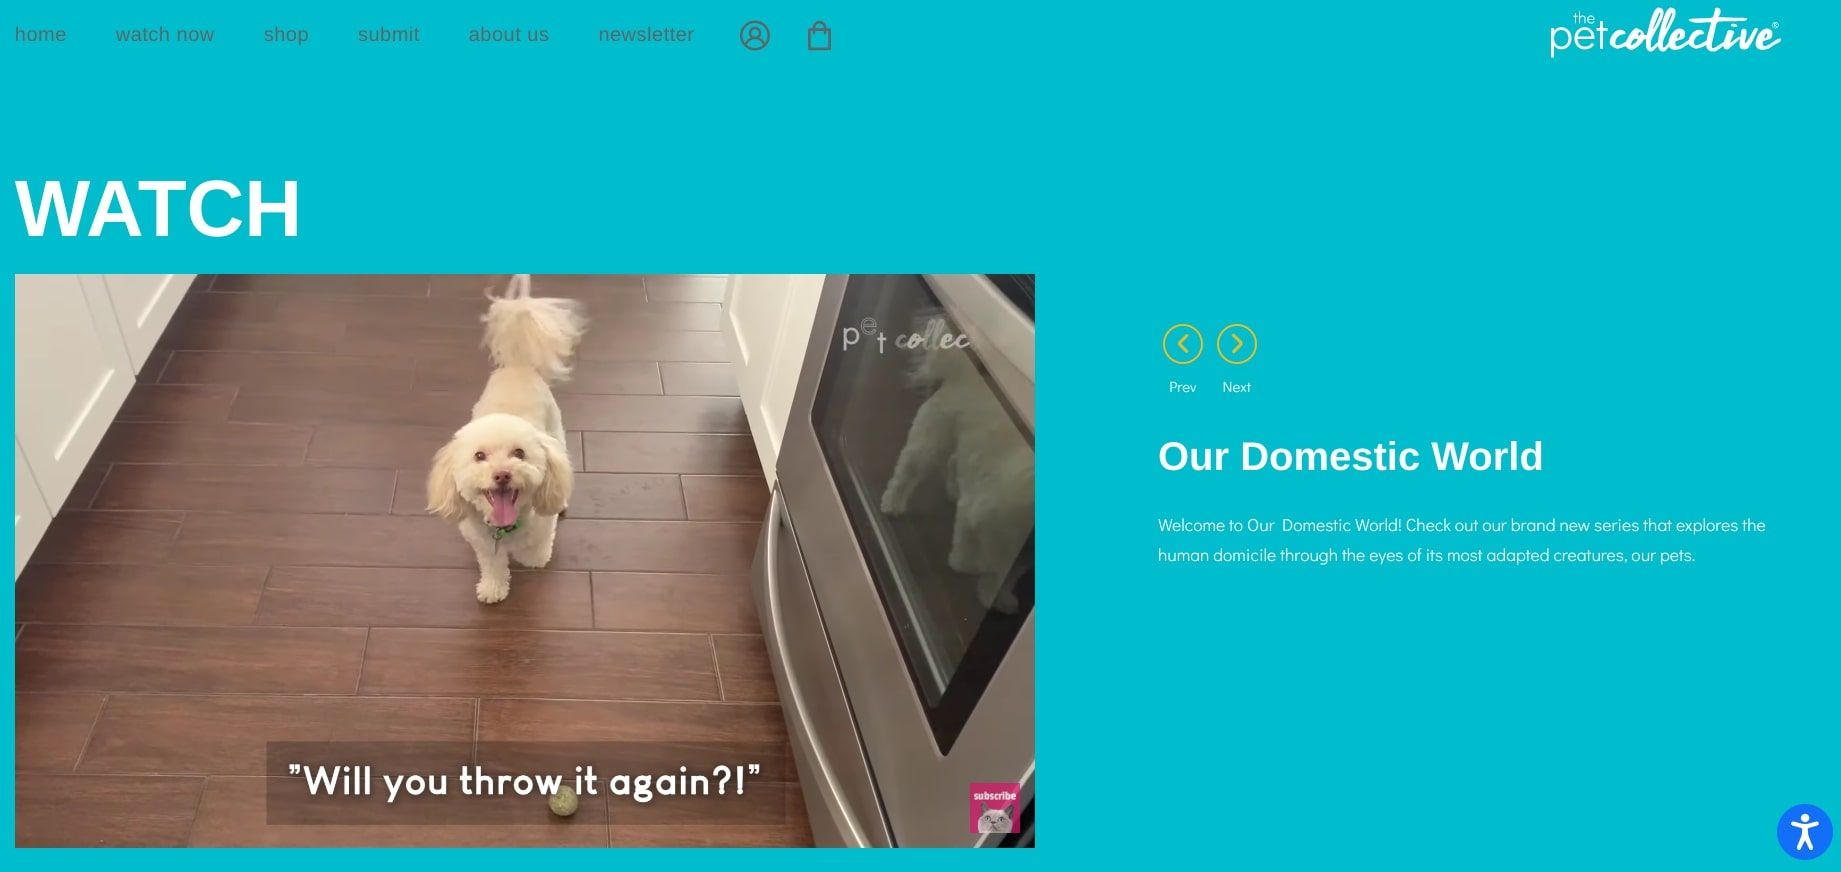 A screenshot of The Pet Collective website home page